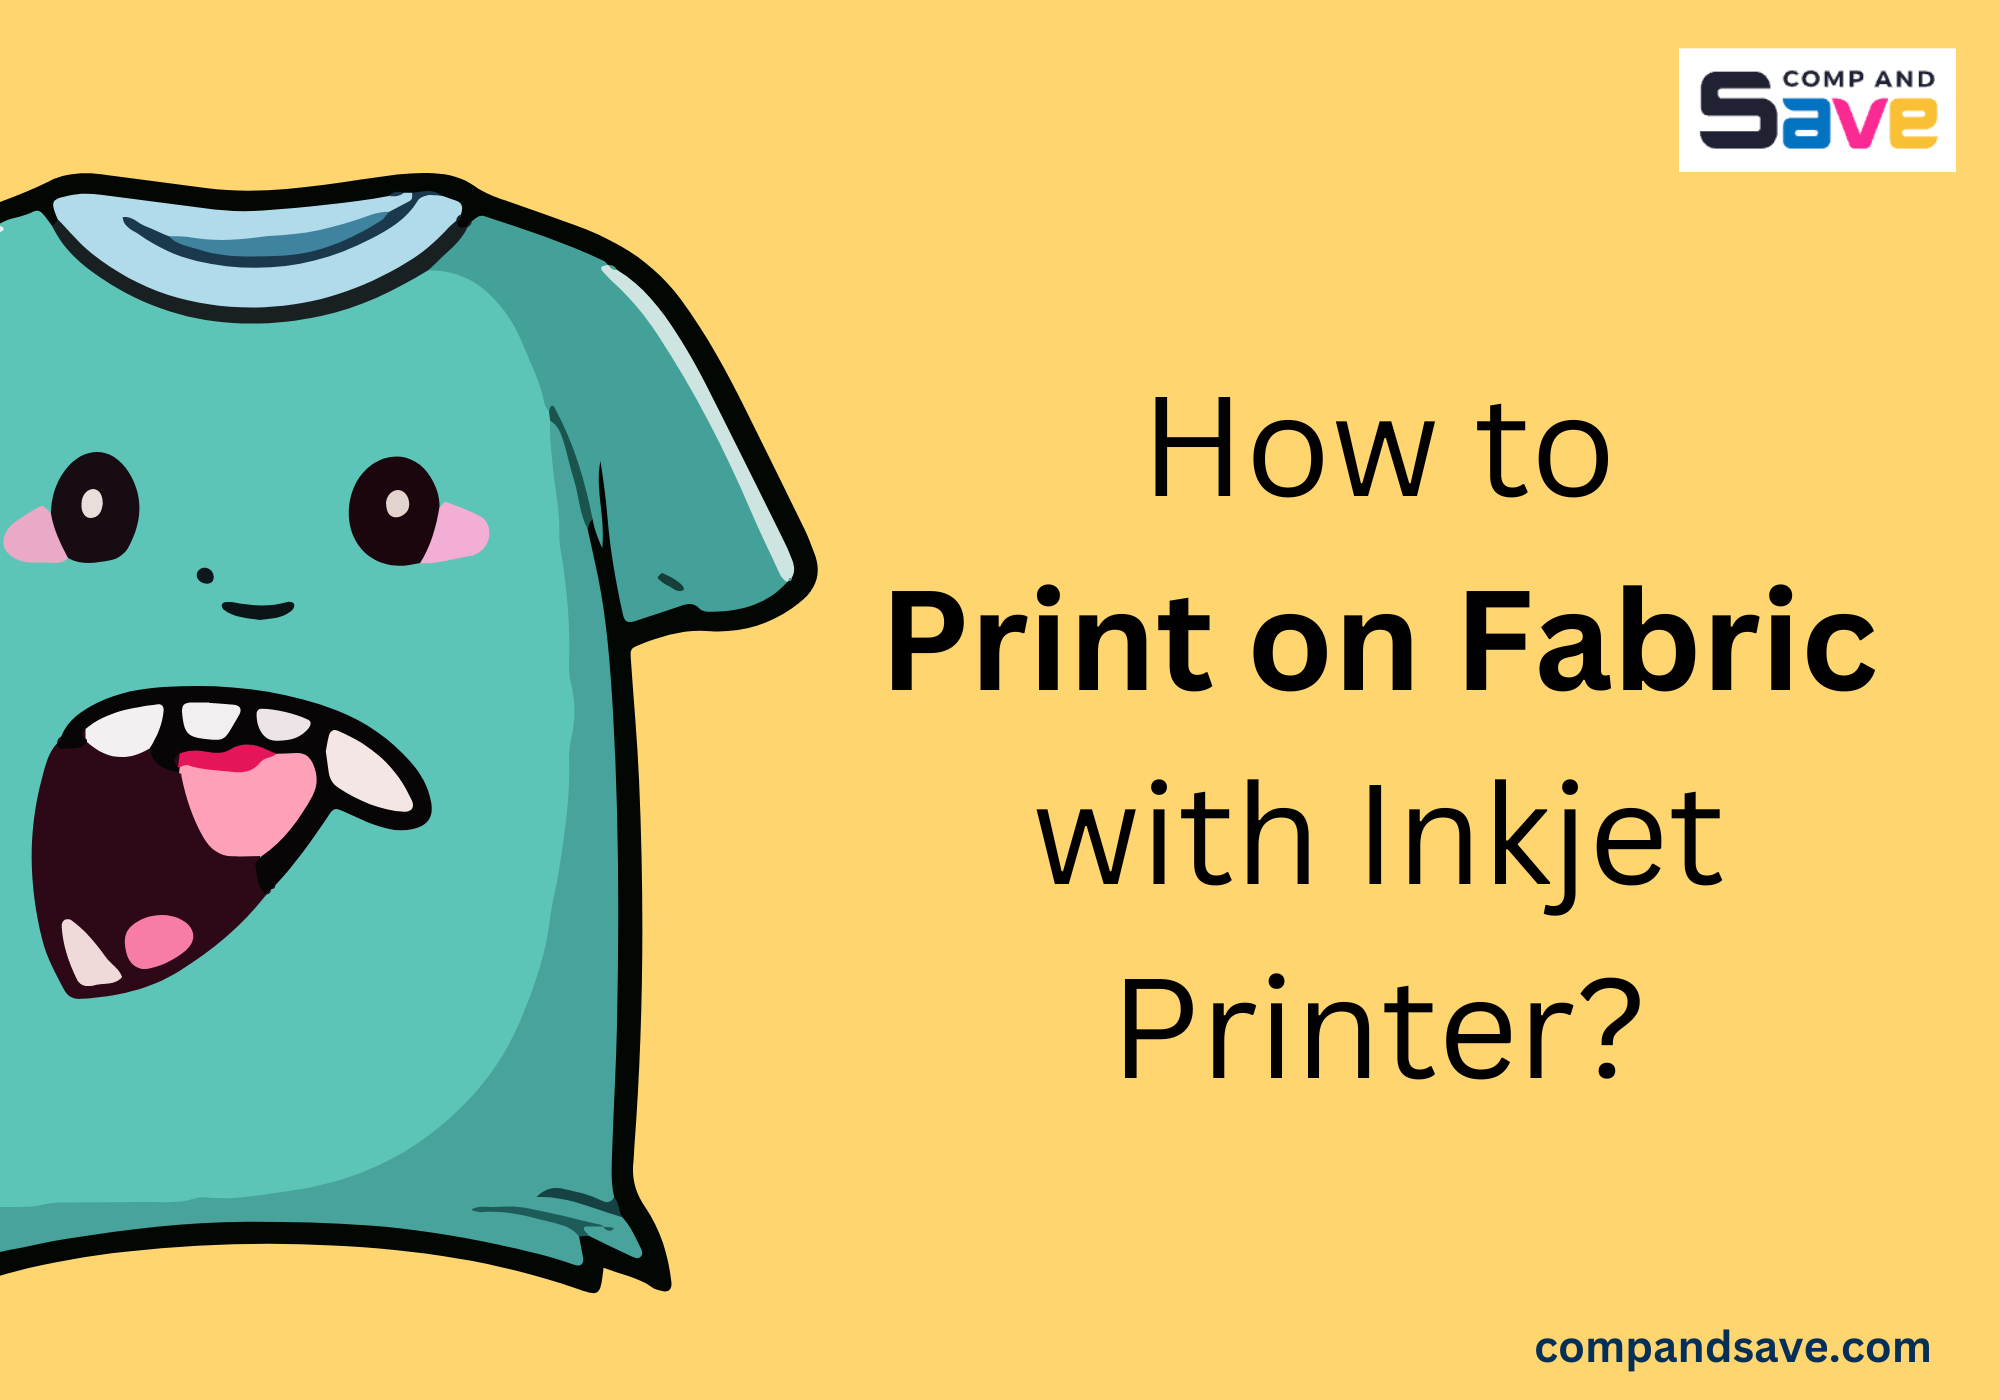 image from How to Print on Fabric with Inkjet Printer: 5 Easy Steps